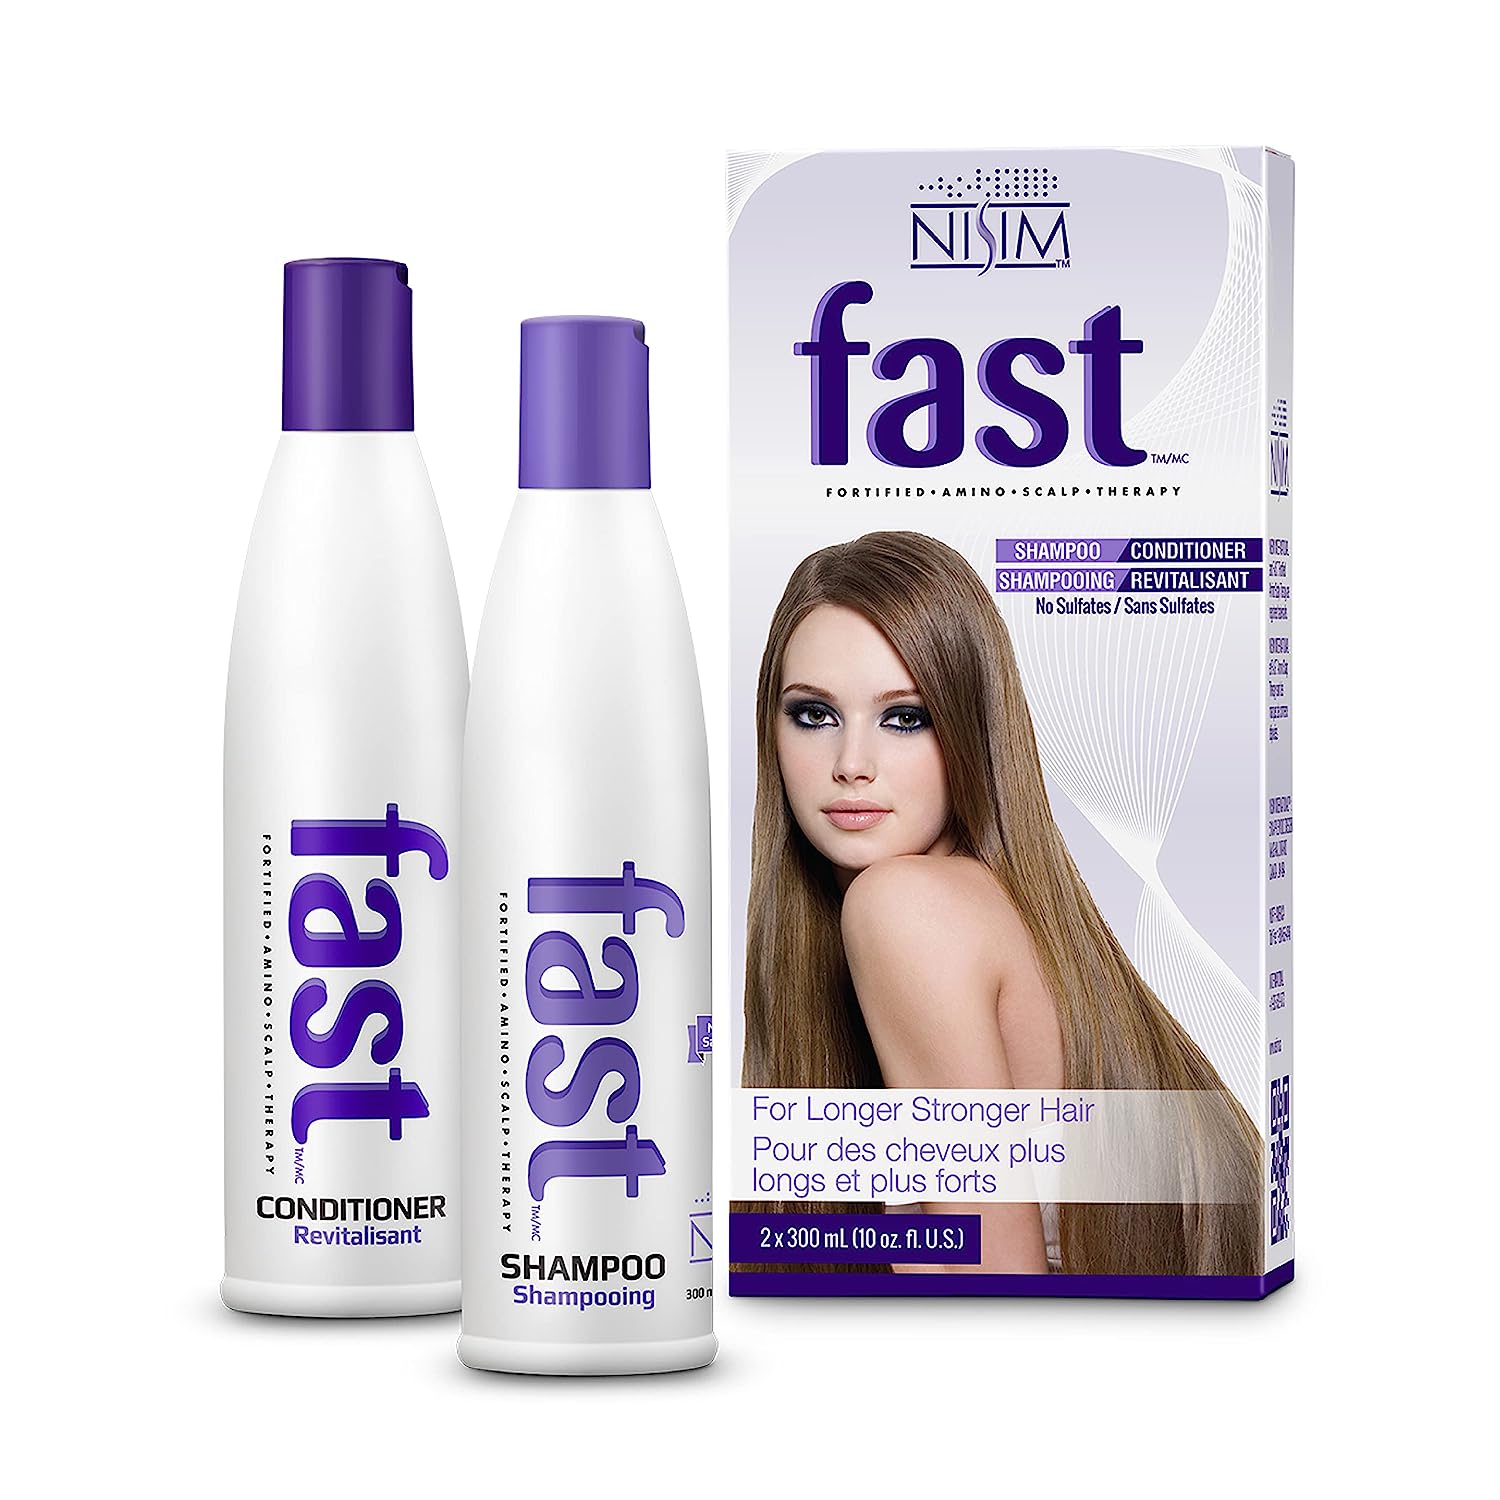 shampoo and conditioner for fast hair growth comparison table